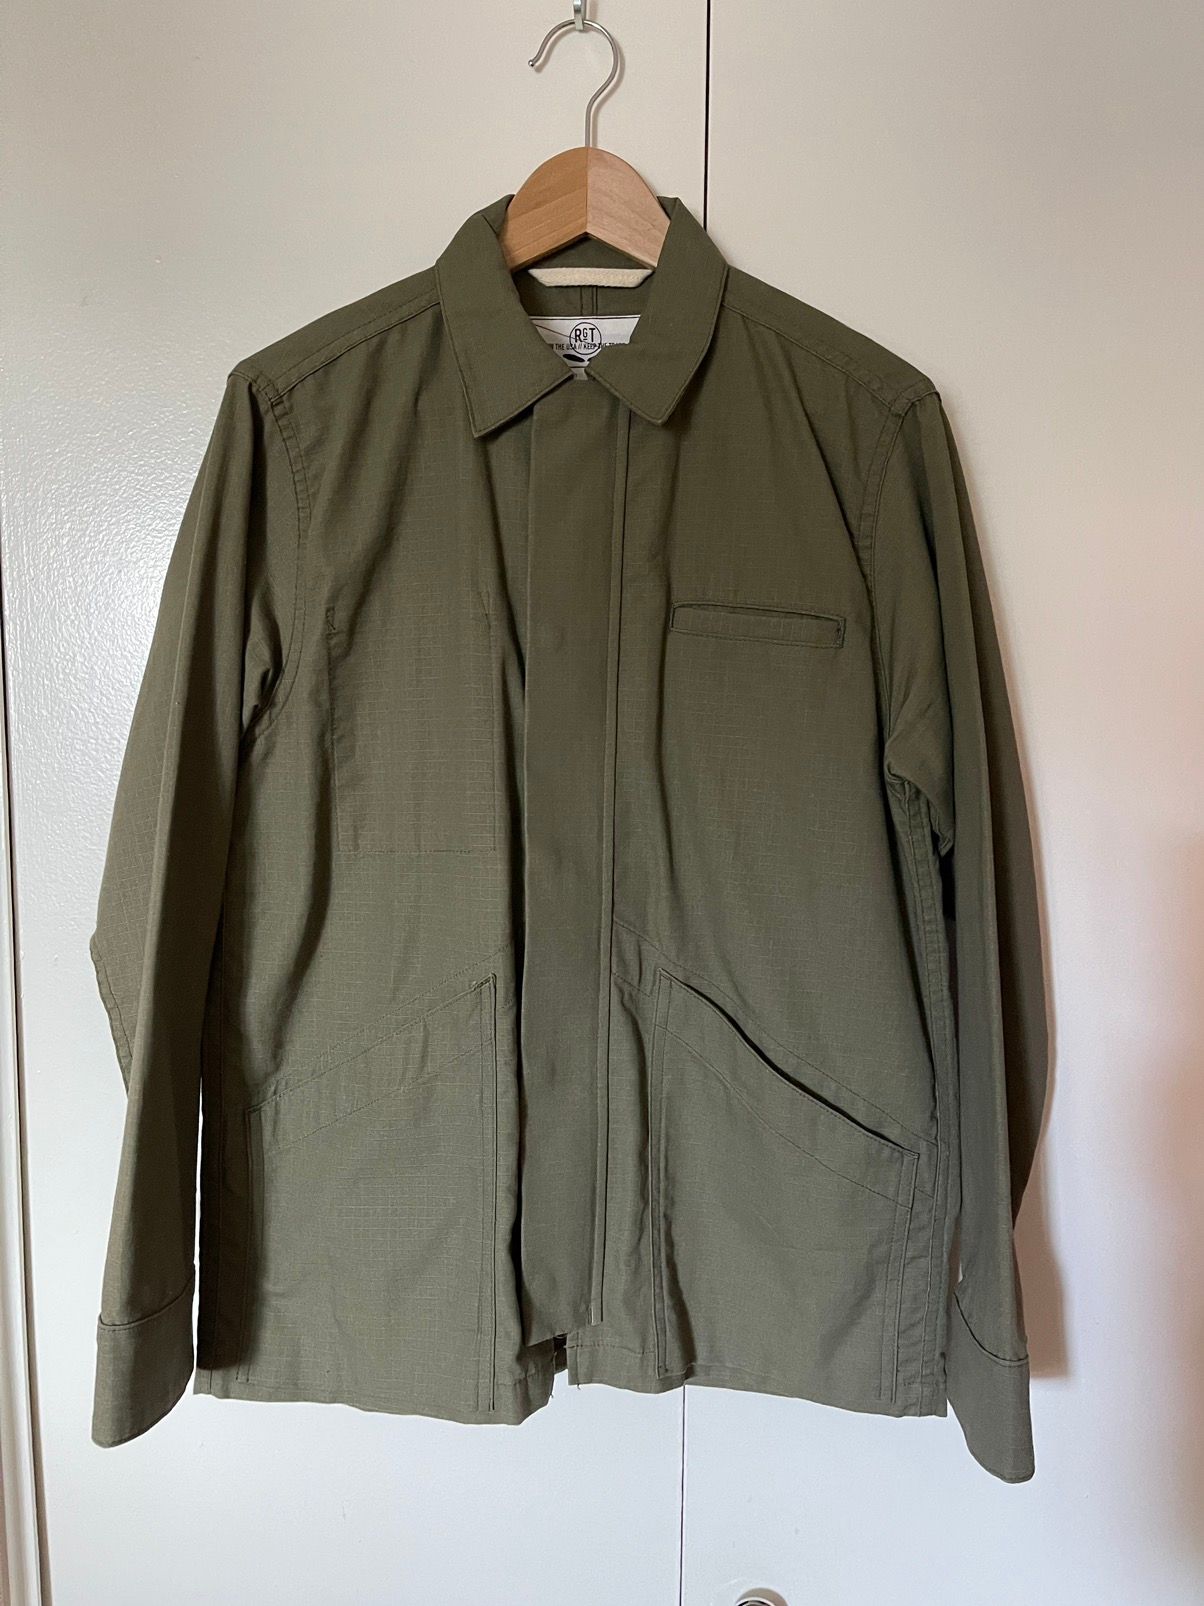 Rogue Territory Rogue Territory Infantry Jacket | Grailed